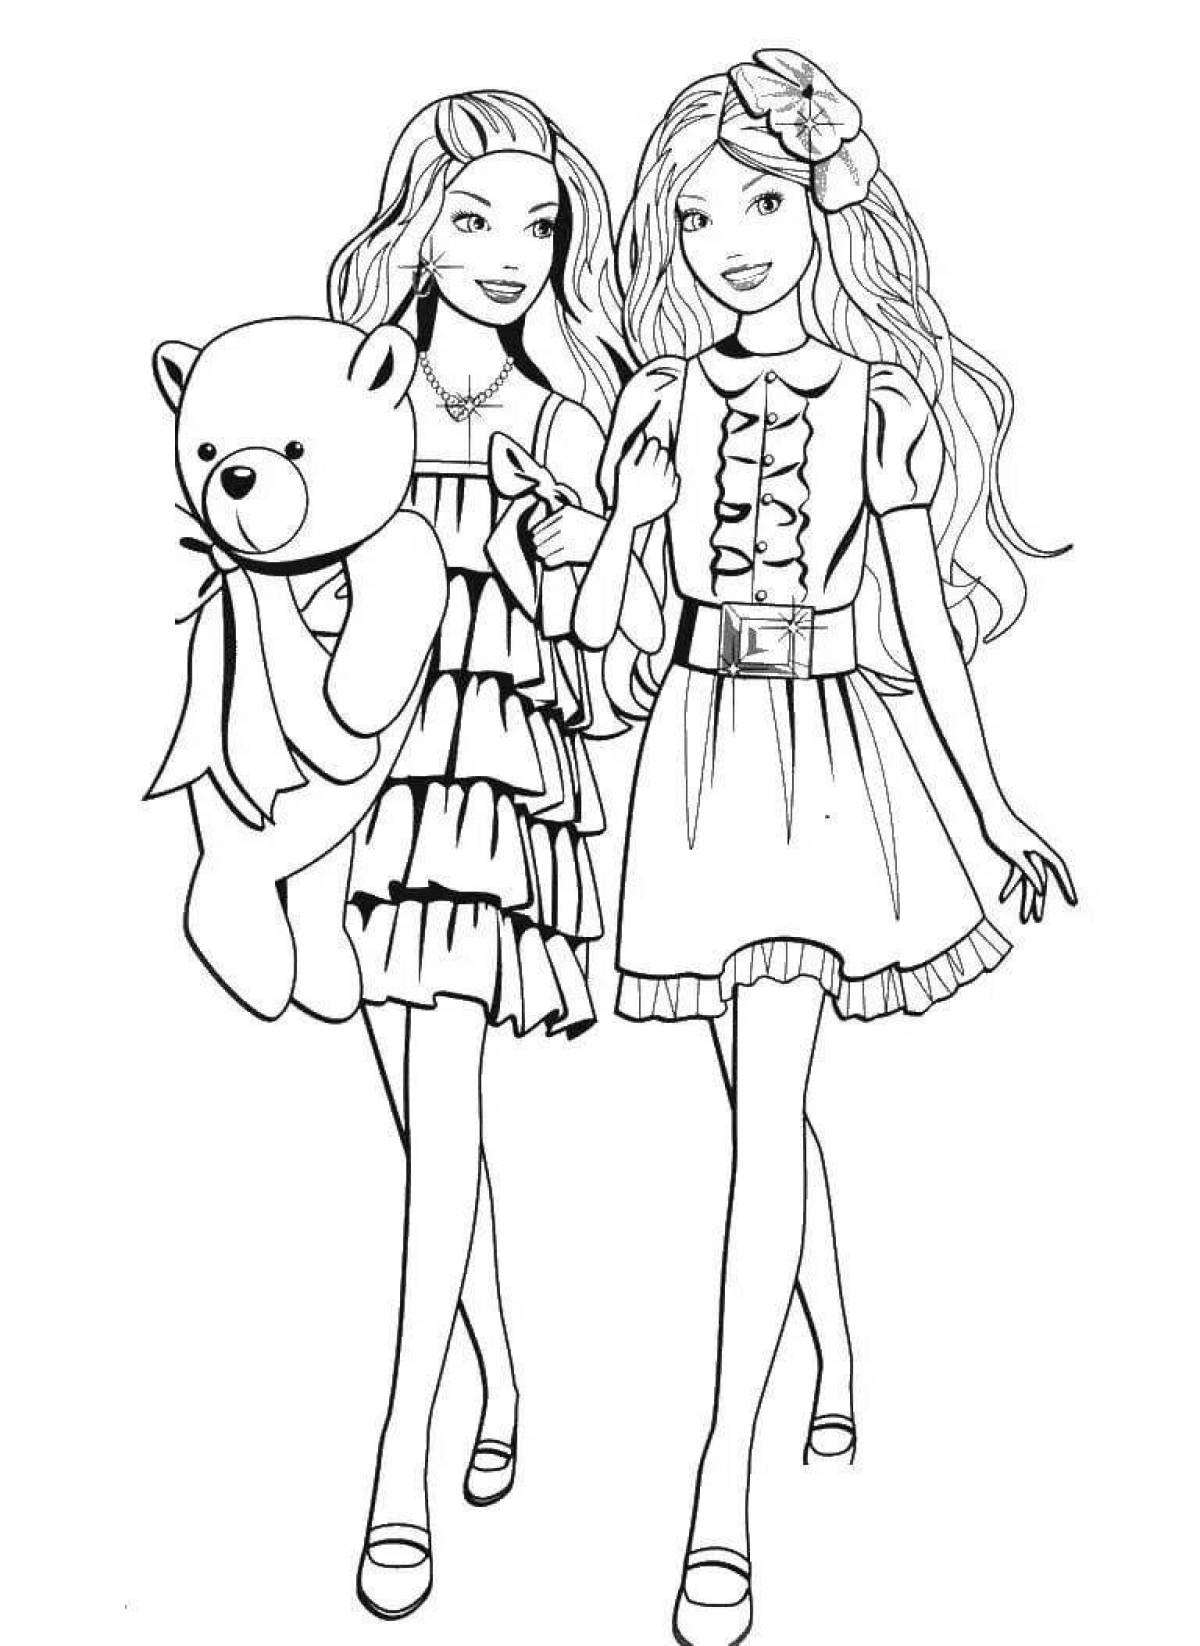 Colourful coloring pages for girls